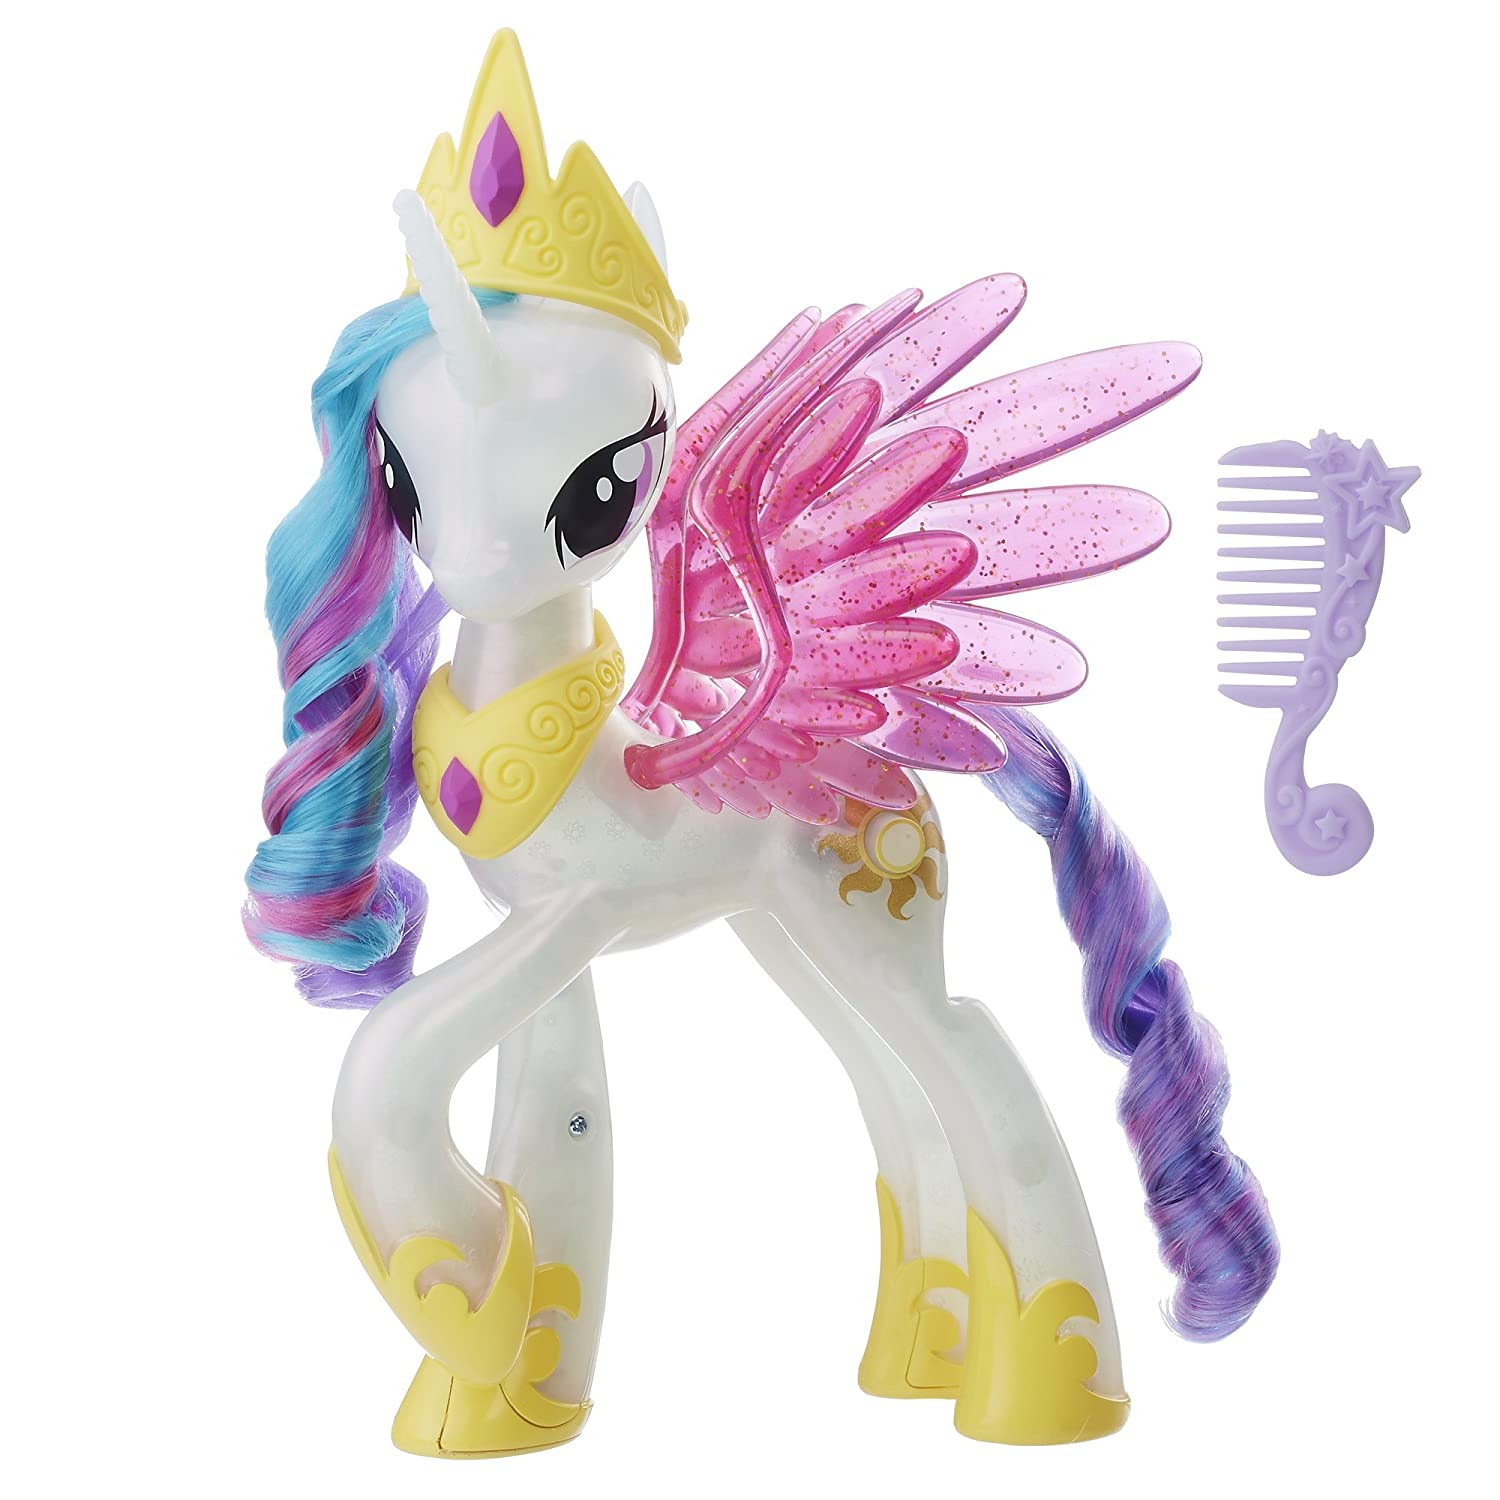 Top 11 Best My Little Pony Toys Reviews in 2022 10